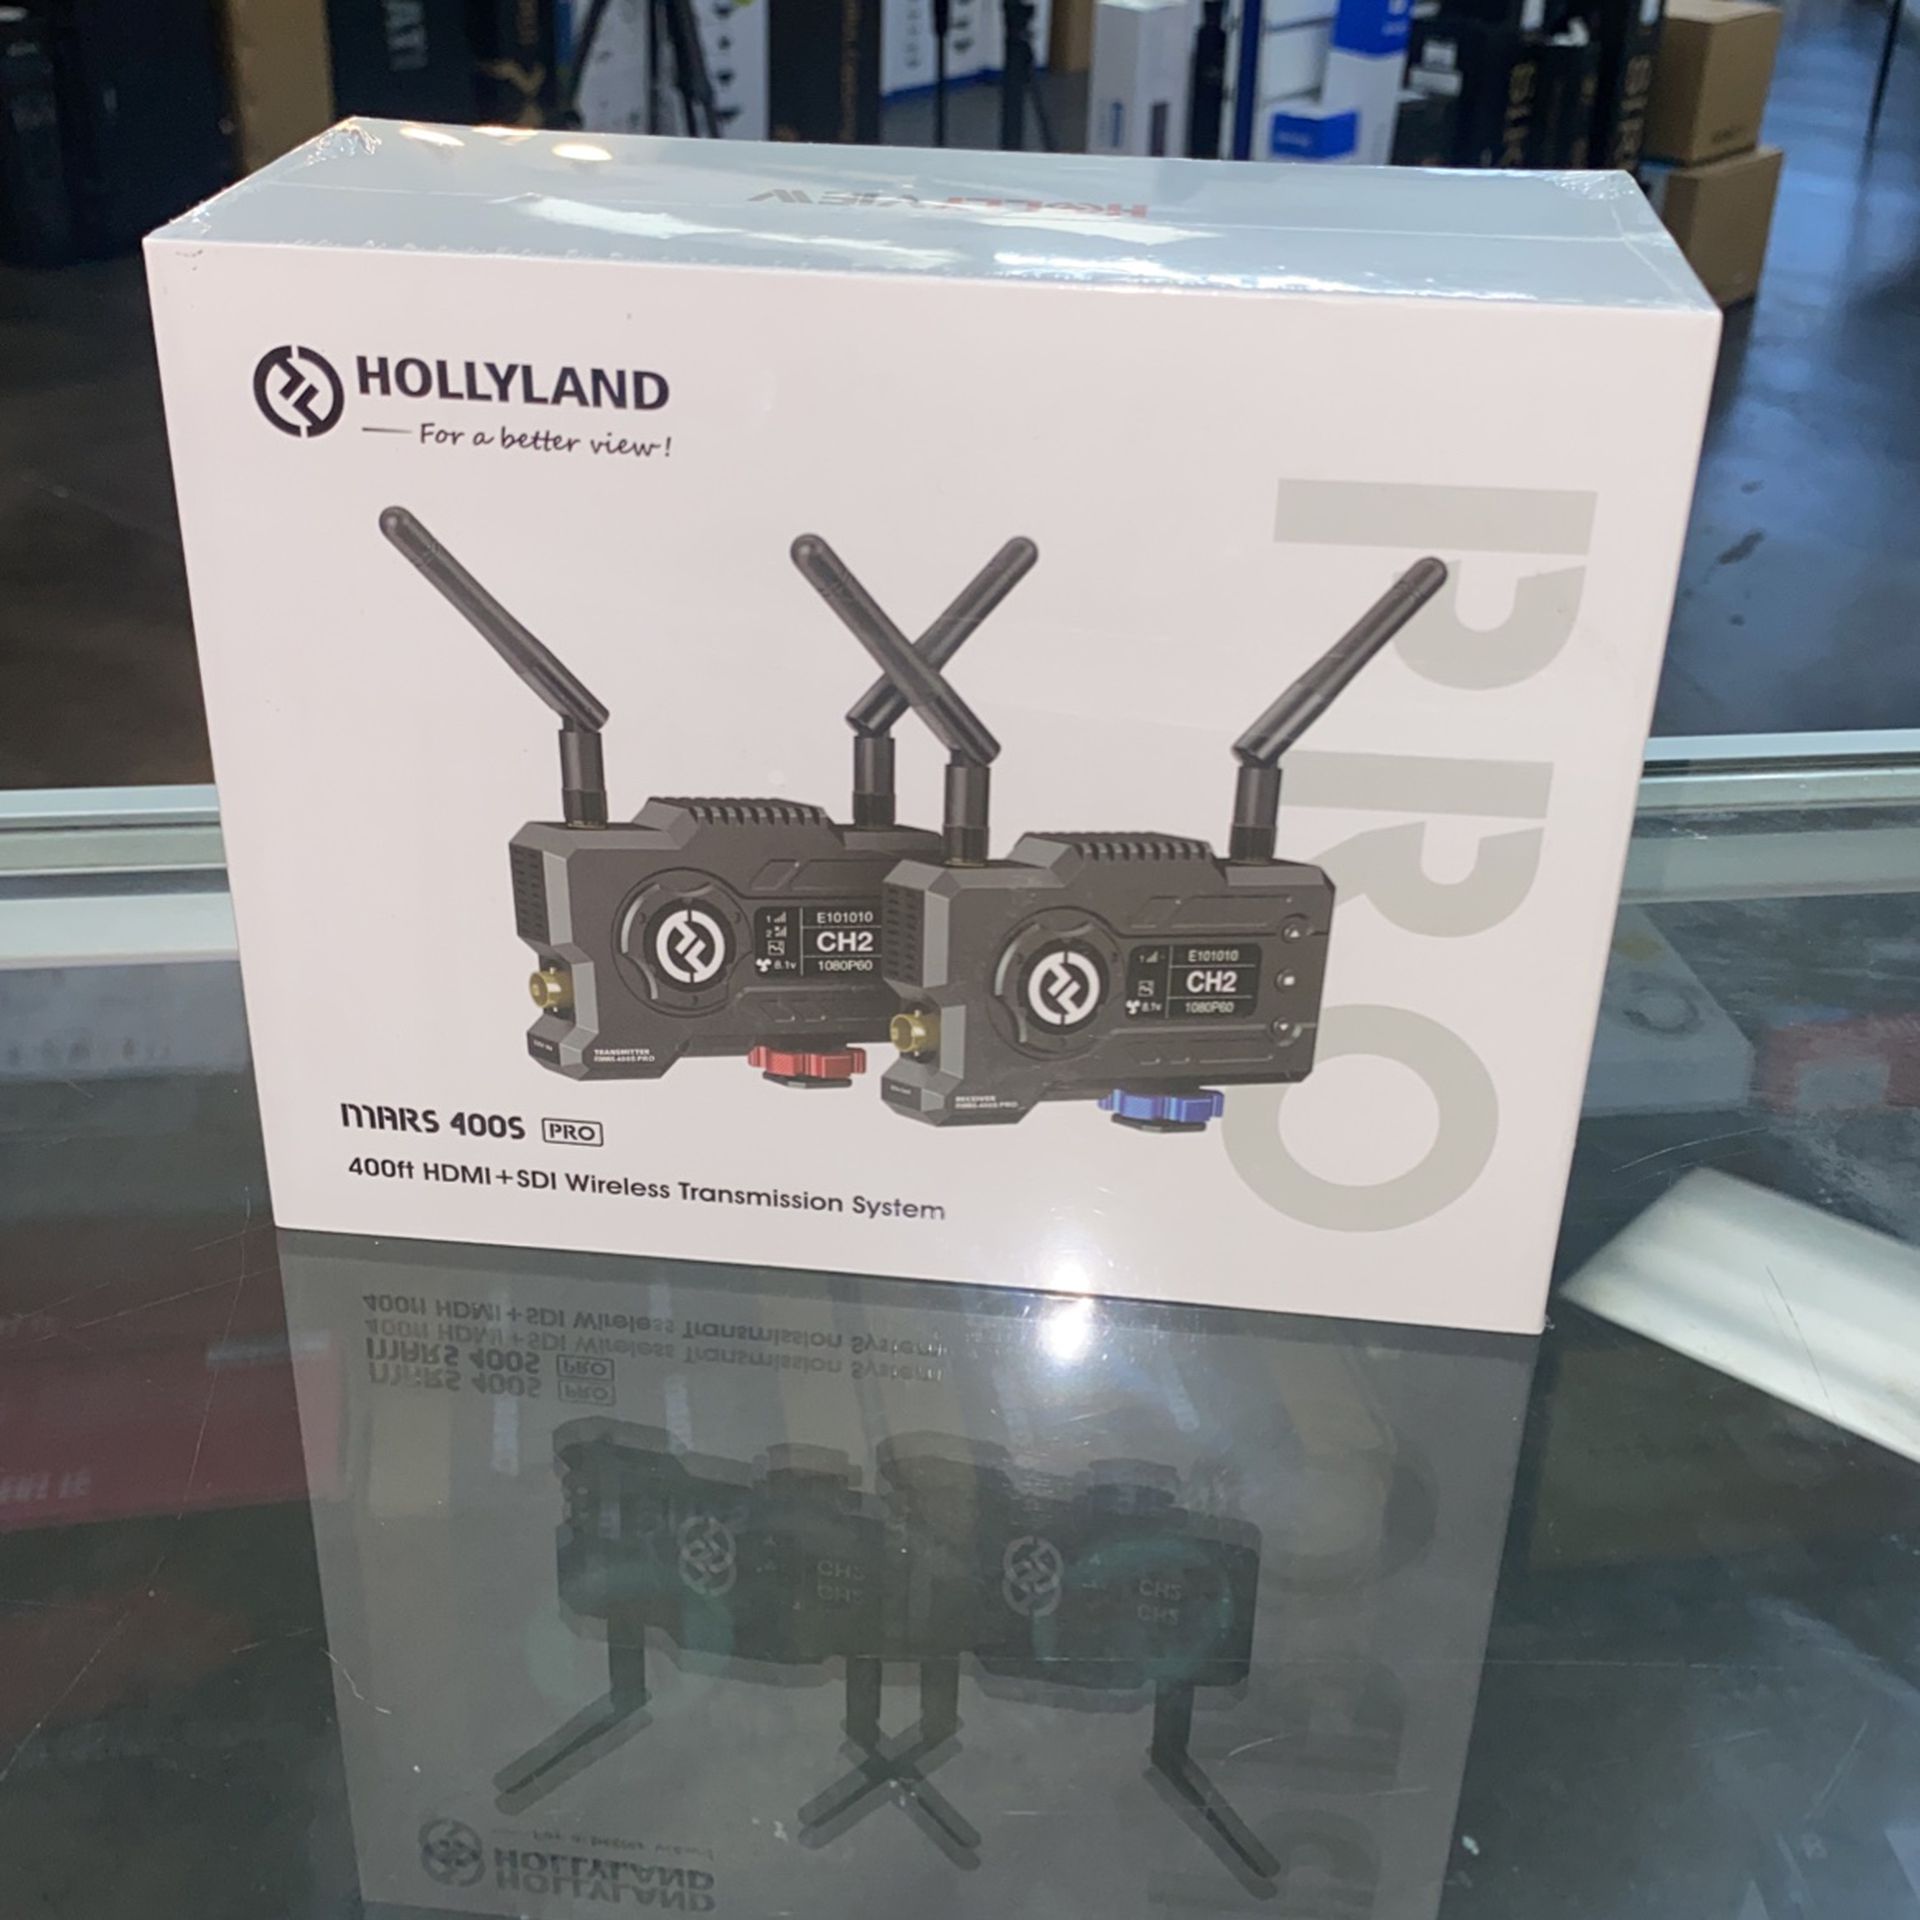 Hollyland Mars 400S Pro Wireless Transmission System. for Sale in